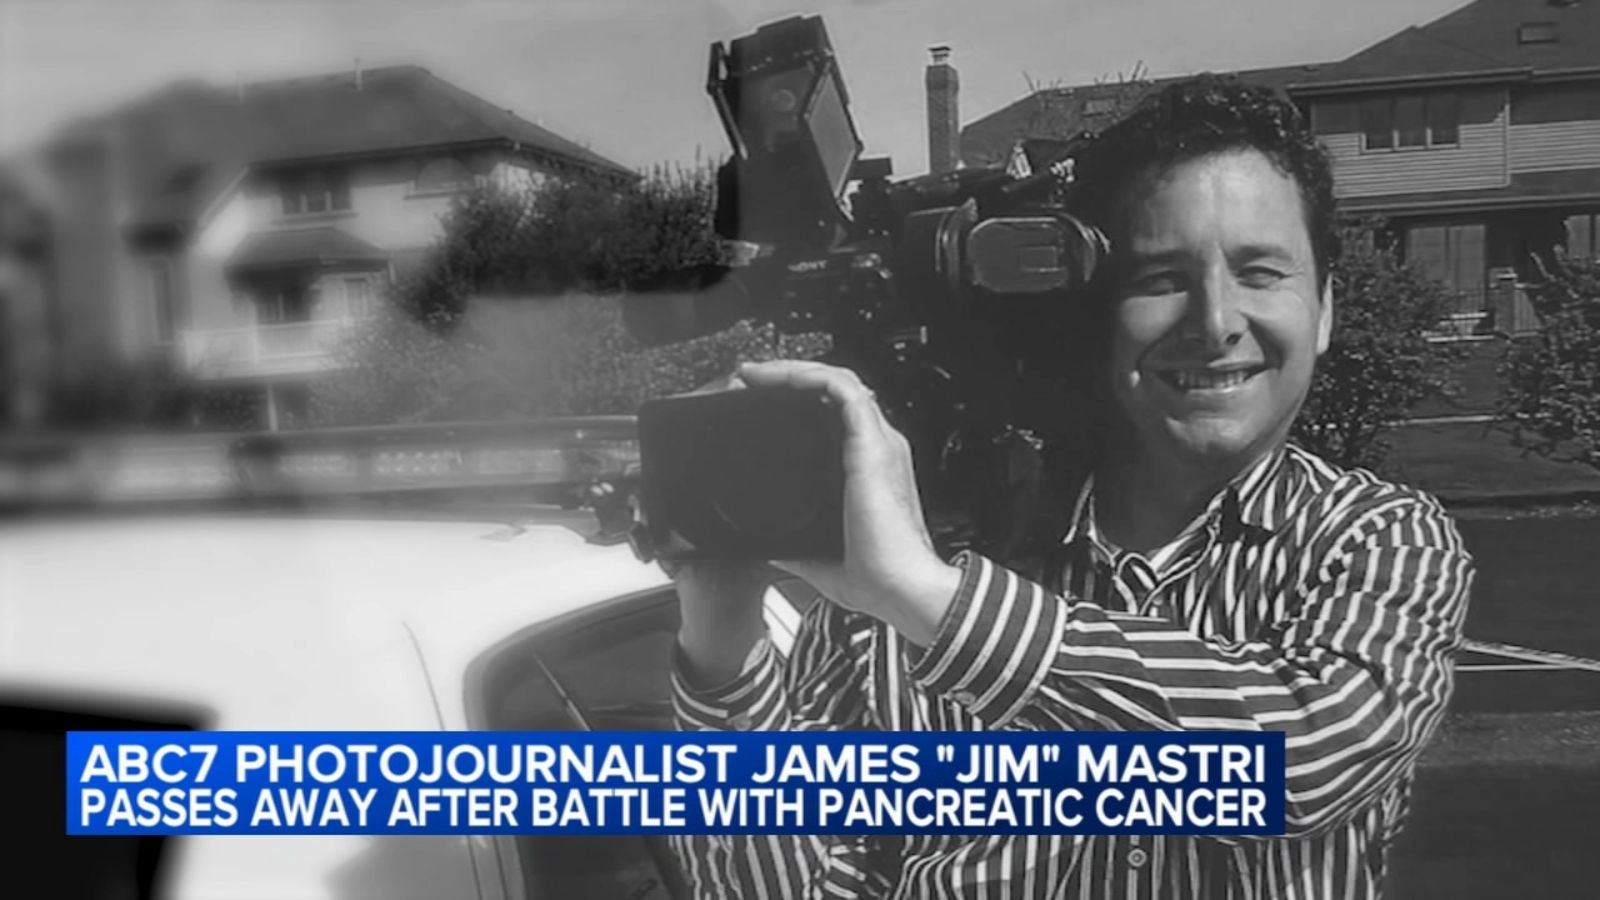 ABC7 Chicago photojournalist James ‘Jim’ Mastri passes away after battle with pancreatic cancer [Video]